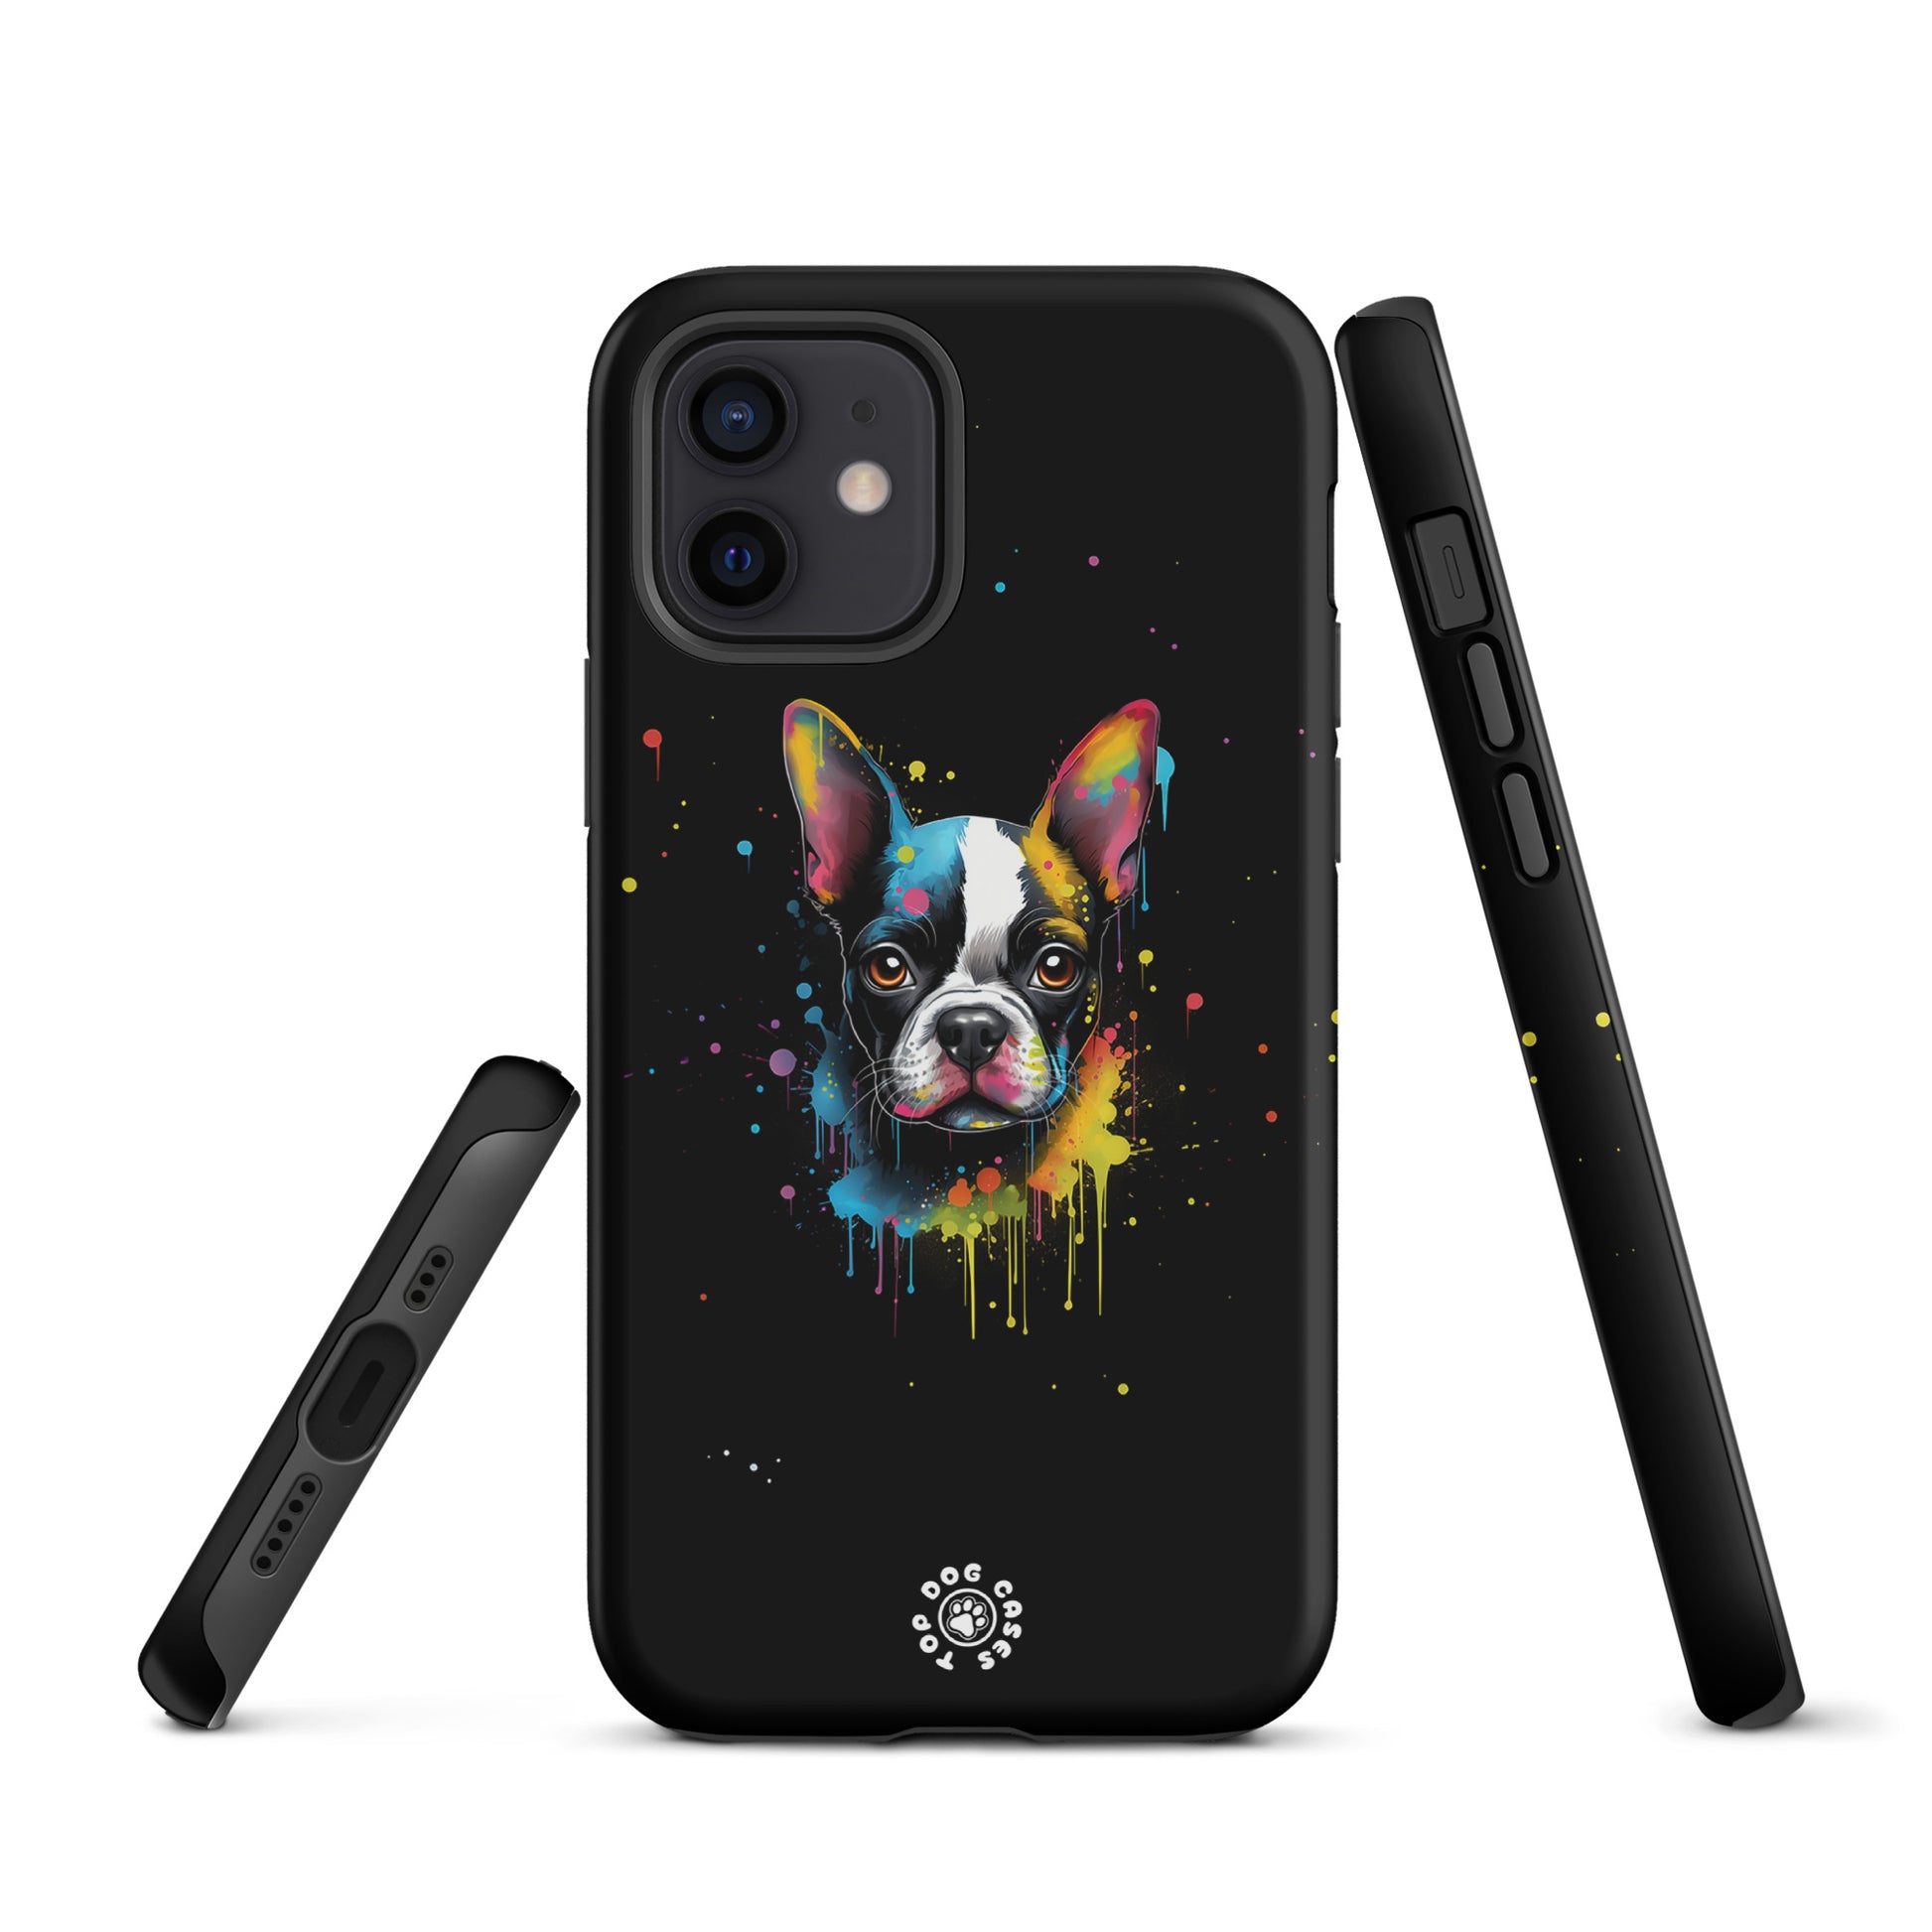 Boston Terrier - Colorful Phone Case - iPhone Case - Top Dog Cases - #BostonTerrier, #ColorfulPhoneCases, #iPhone, #iPhone11, #iphone11case, #iPhone12, #iPhone12case, #iPhone13, #iPhone13case, #iPhone13DogCase, #iPhone13Mini, #iPhone13Pro, #iPhone13ProMax, #iPhone14, #iPhone14case, #iPhone14DogCase, #iPhone14Plus, #iPhone14Pluscase, #iPhone14Pro, #iPhone14ProMax, #iPhone14ProMaxCase, #iPhone15, #iPhone15case, #iPhonecase, #iphonedogcase